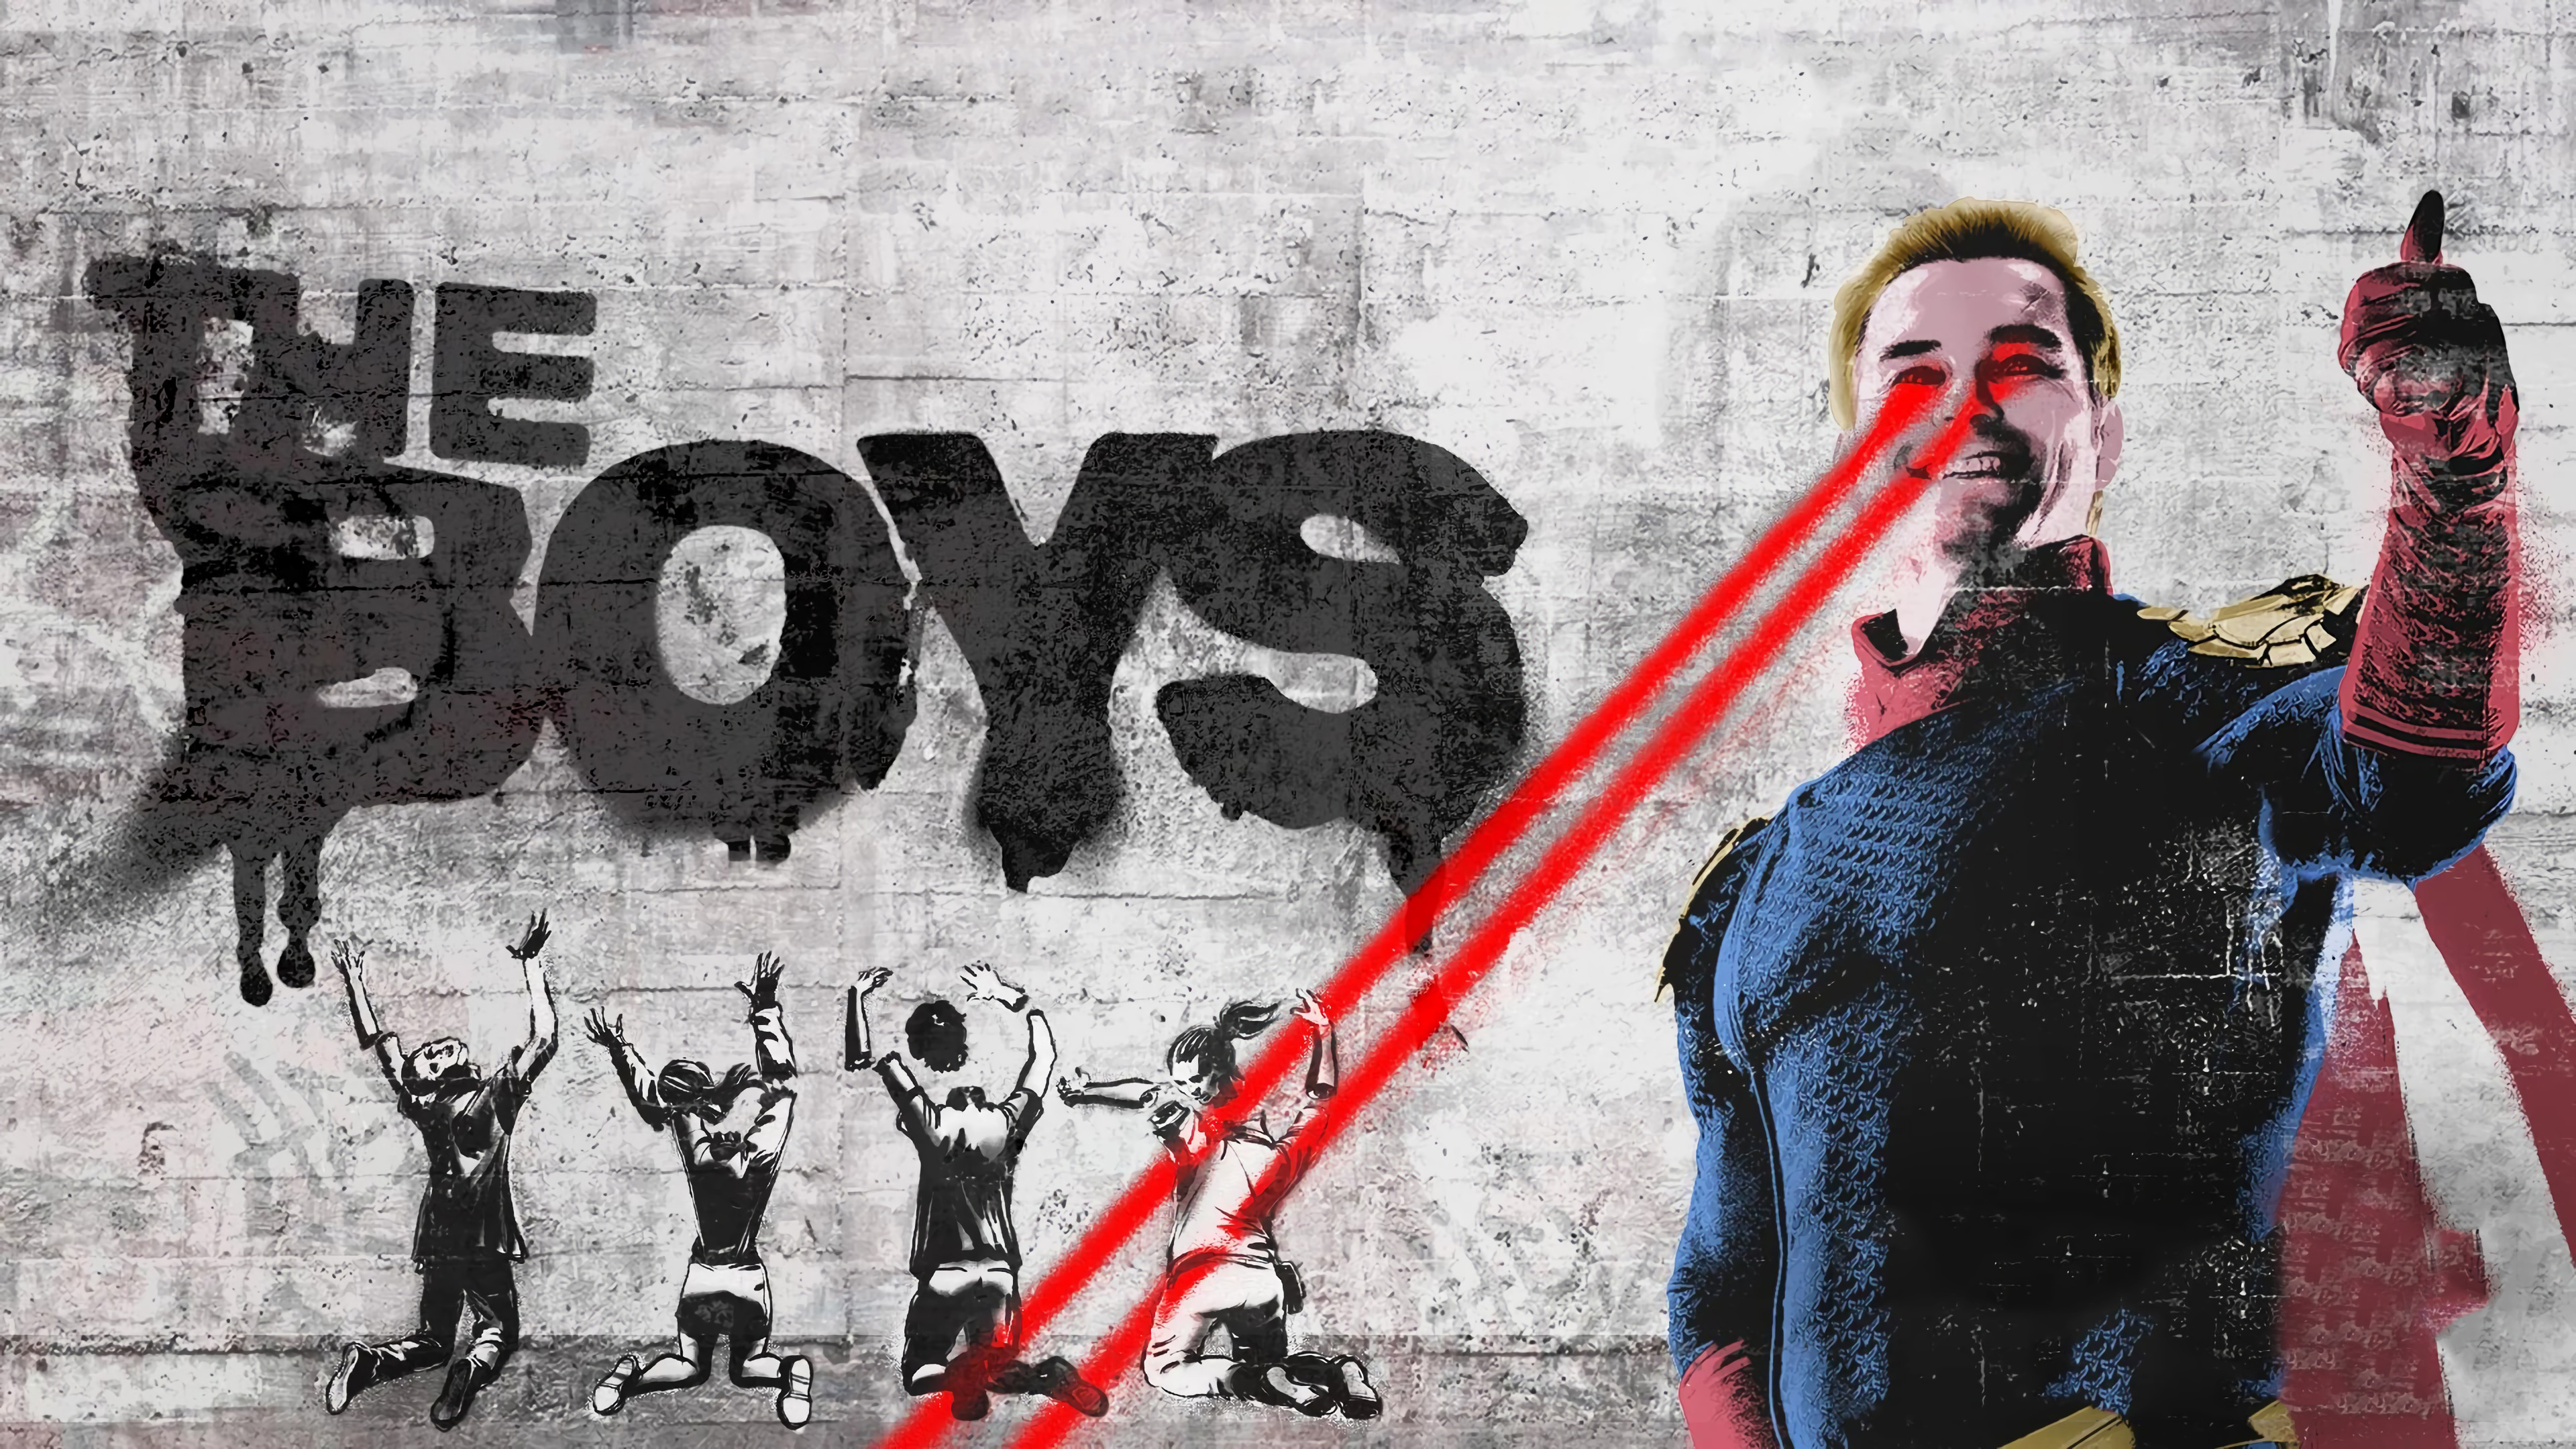 TV Show The Boys HD Wallpaper | Background Image